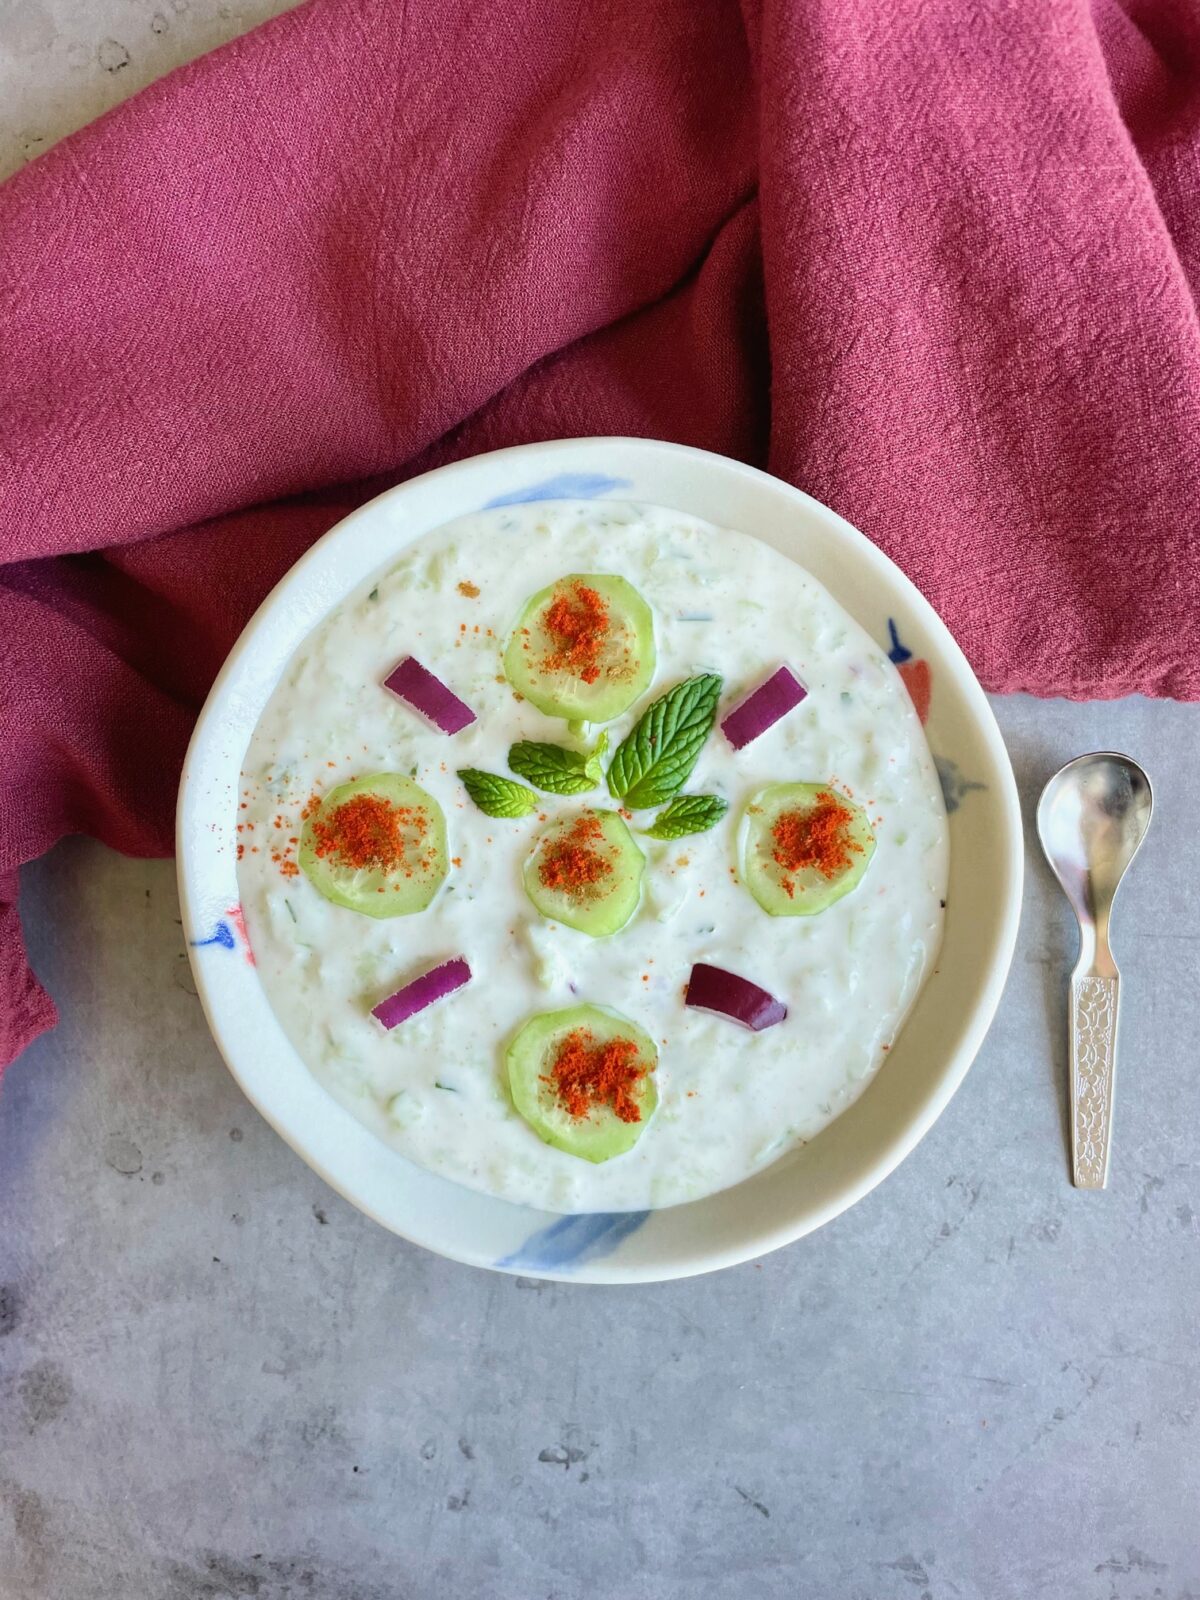 Cucumber raita recipe for biryani with fresh cucumbers, mint and red onion slices. Stainless steel spoon next to the bowl. Red towel underneath serving bowl.